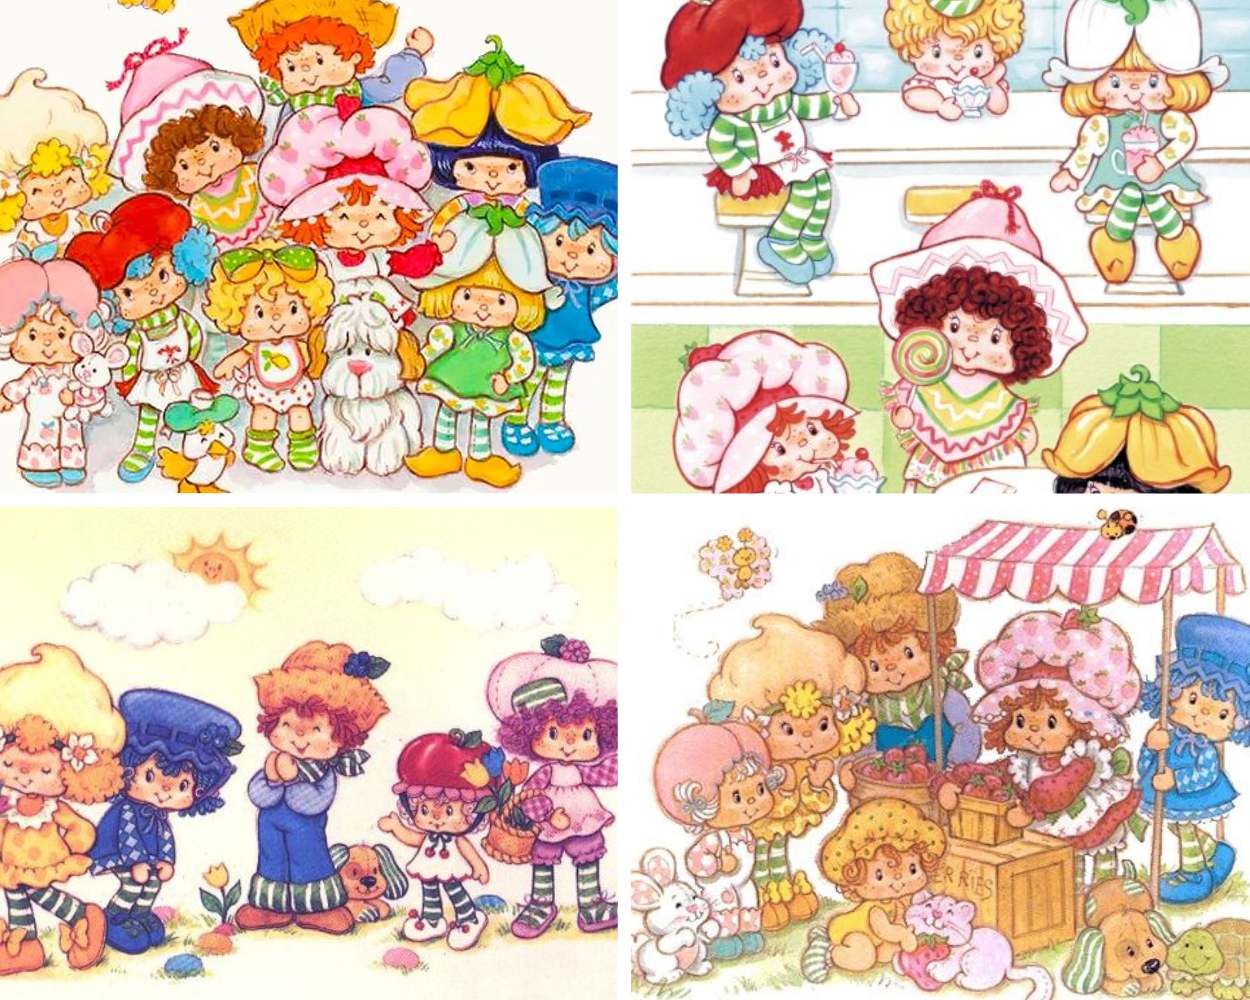 Shortcake Characters From The 80s